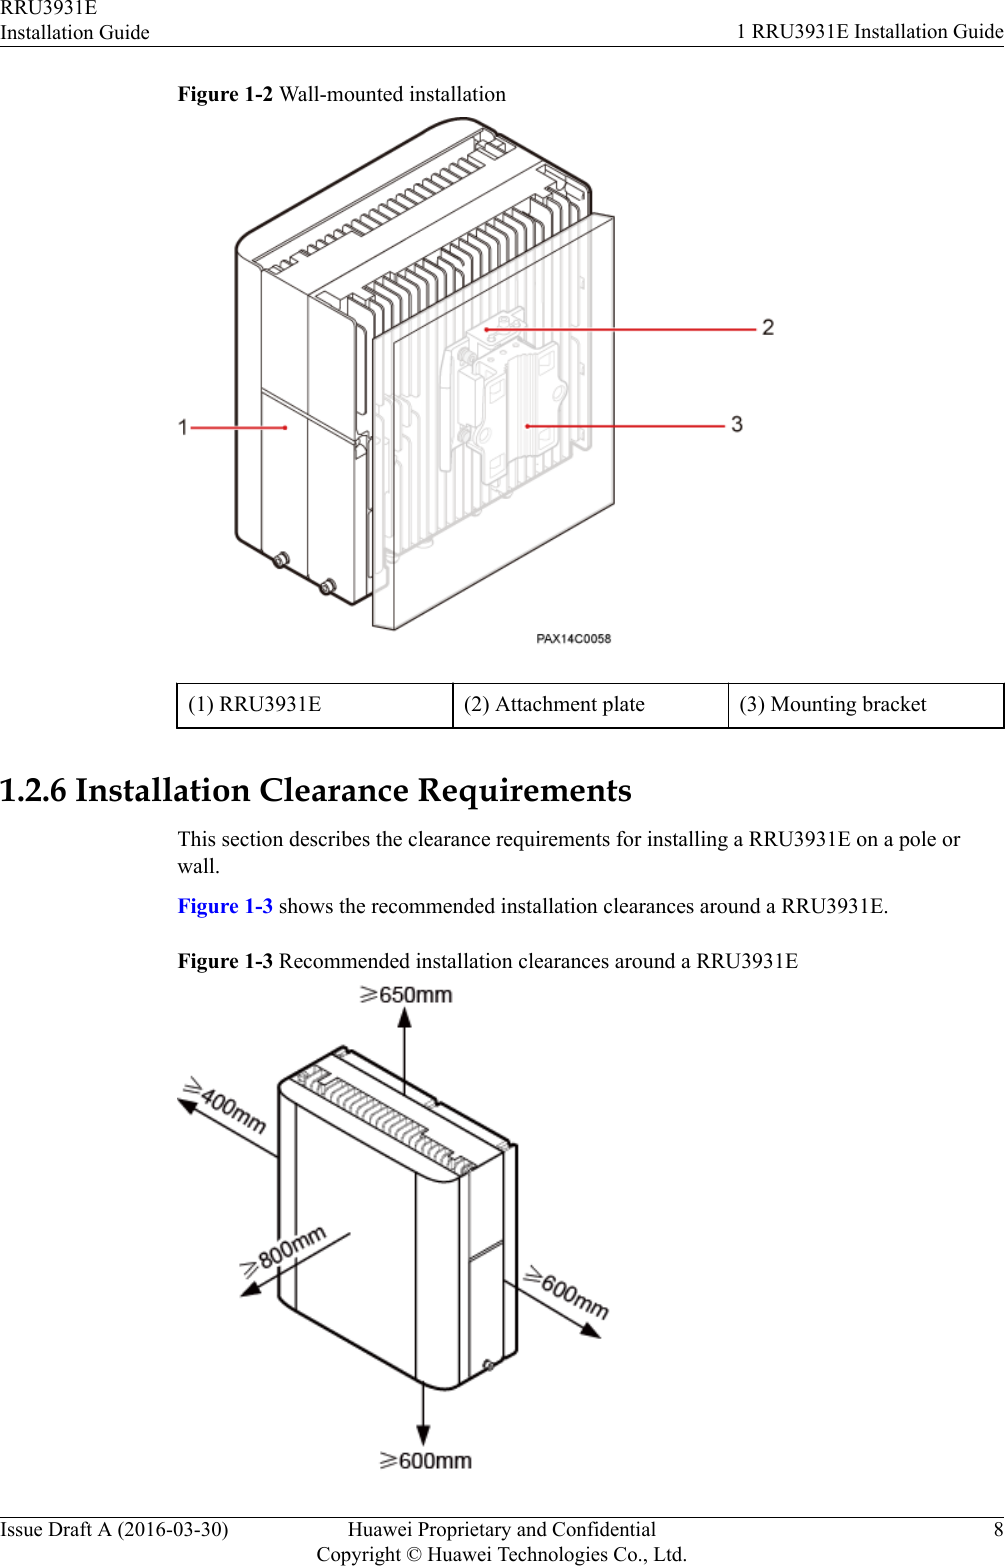 Figure 1-2 Wall-mounted installation(1) RRU3931E (2) Attachment plate (3) Mounting bracket 1.2.6 Installation Clearance RequirementsThis section describes the clearance requirements for installing a RRU3931E on a pole orwall.Figure 1-3 shows the recommended installation clearances around a RRU3931E.Figure 1-3 Recommended installation clearances around a RRU3931ERRU3931EInstallation Guide 1 RRU3931E Installation GuideIssue Draft A (2016-03-30) Huawei Proprietary and ConfidentialCopyright © Huawei Technologies Co., Ltd.8